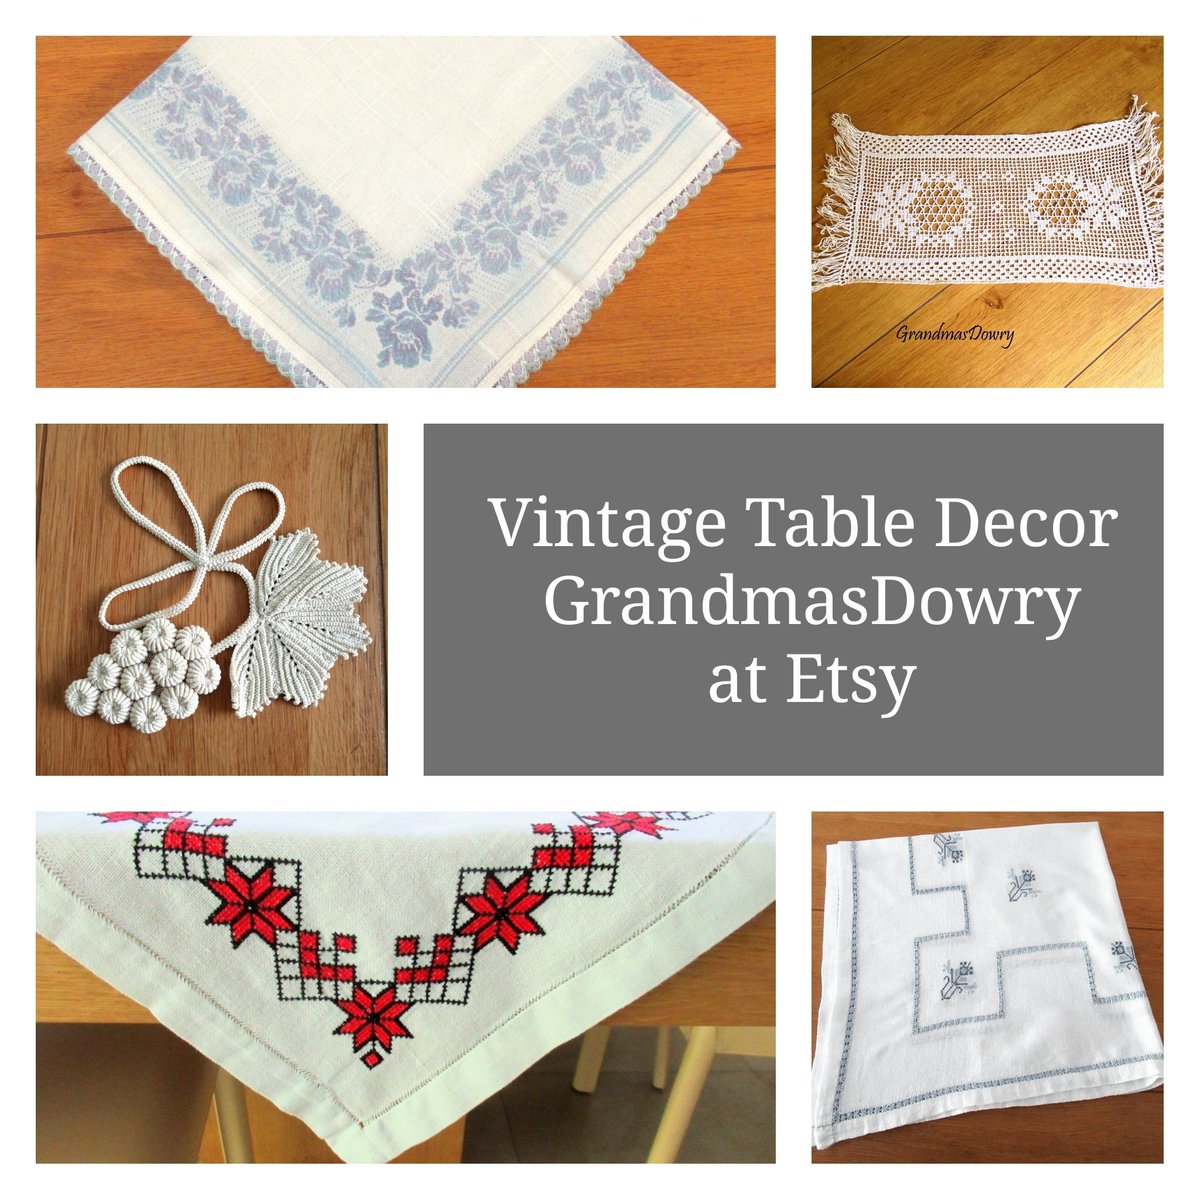 Check out my #shop for beautiful tablecloths, table tops, and more.
Visit grandmasdowry.etsy.com and enjoy our #sale #vintagetablecloth #tabletop #vintagelinen #tablecover